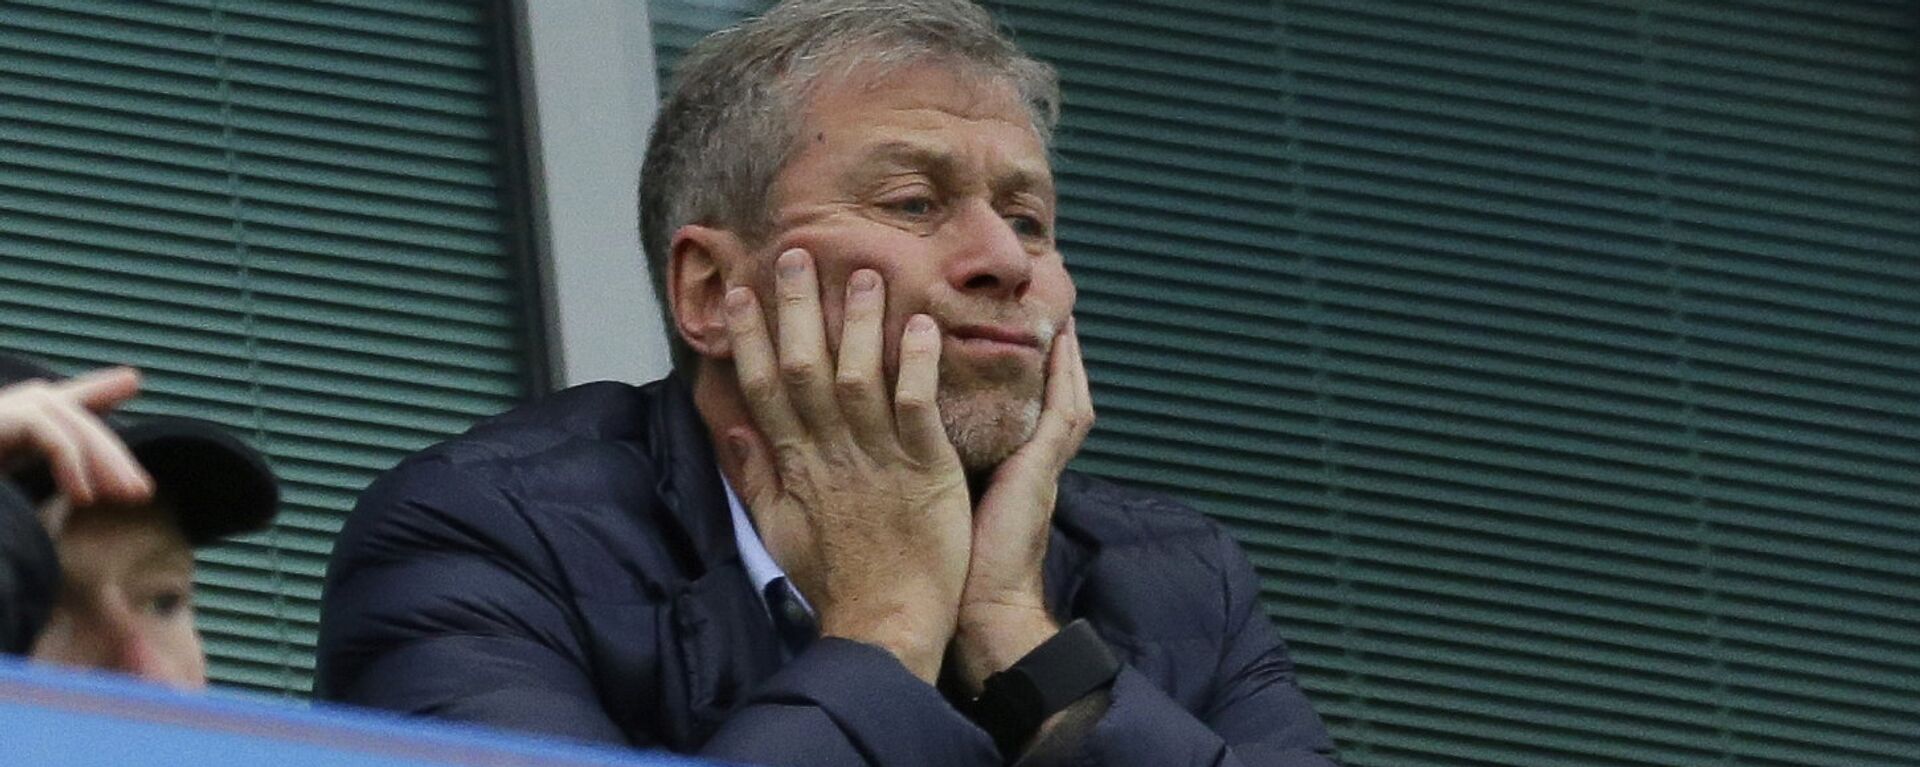 In this file photo dated Saturday, Dec. 19, 2015, Chelsea soccer club owner Roman Abramovich sits in his box before the English Premier League soccer match between Chelsea and Sunderland at Stamford Bridge stadium in London. Russian billionaire Roman Abramovich has received Israeli citizenship after his British visa has not been renewed. An Israeli Immigration and Absorption Ministry official says the Chelsea soccer club owner arrived in Israel Monday and was granted citizenship in accordance with an Israeli law granting that right to people of Jewish descent - Sputnik International, 1920, 12.03.2022